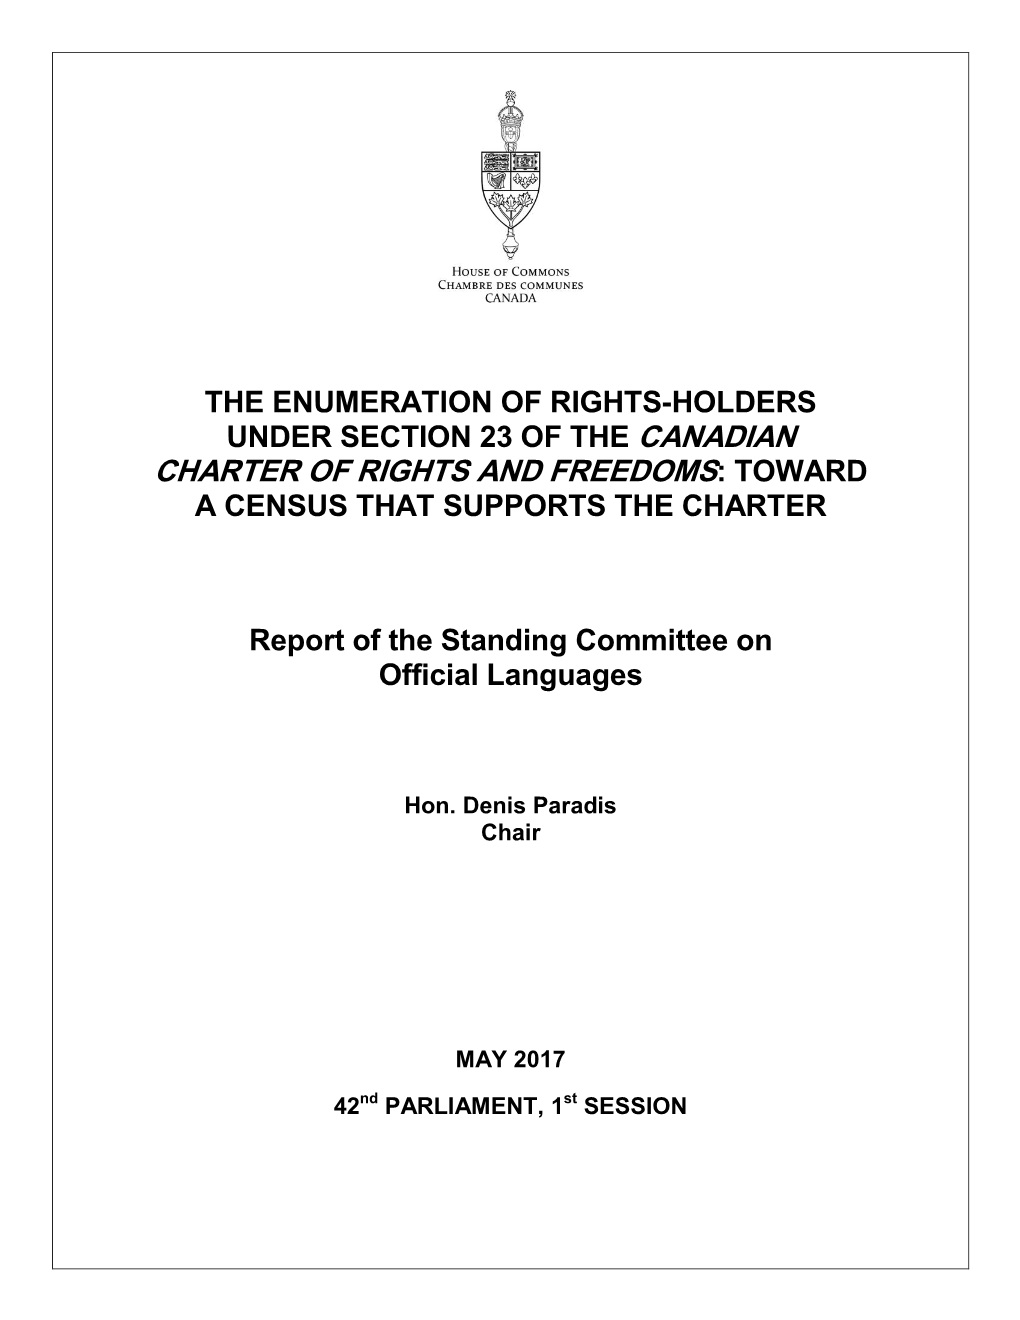 The Enumeration of Rights-Holders Under Section 23 of the Canadian Charter of Rights and Freedoms: Toward a Census That Supports the Charter